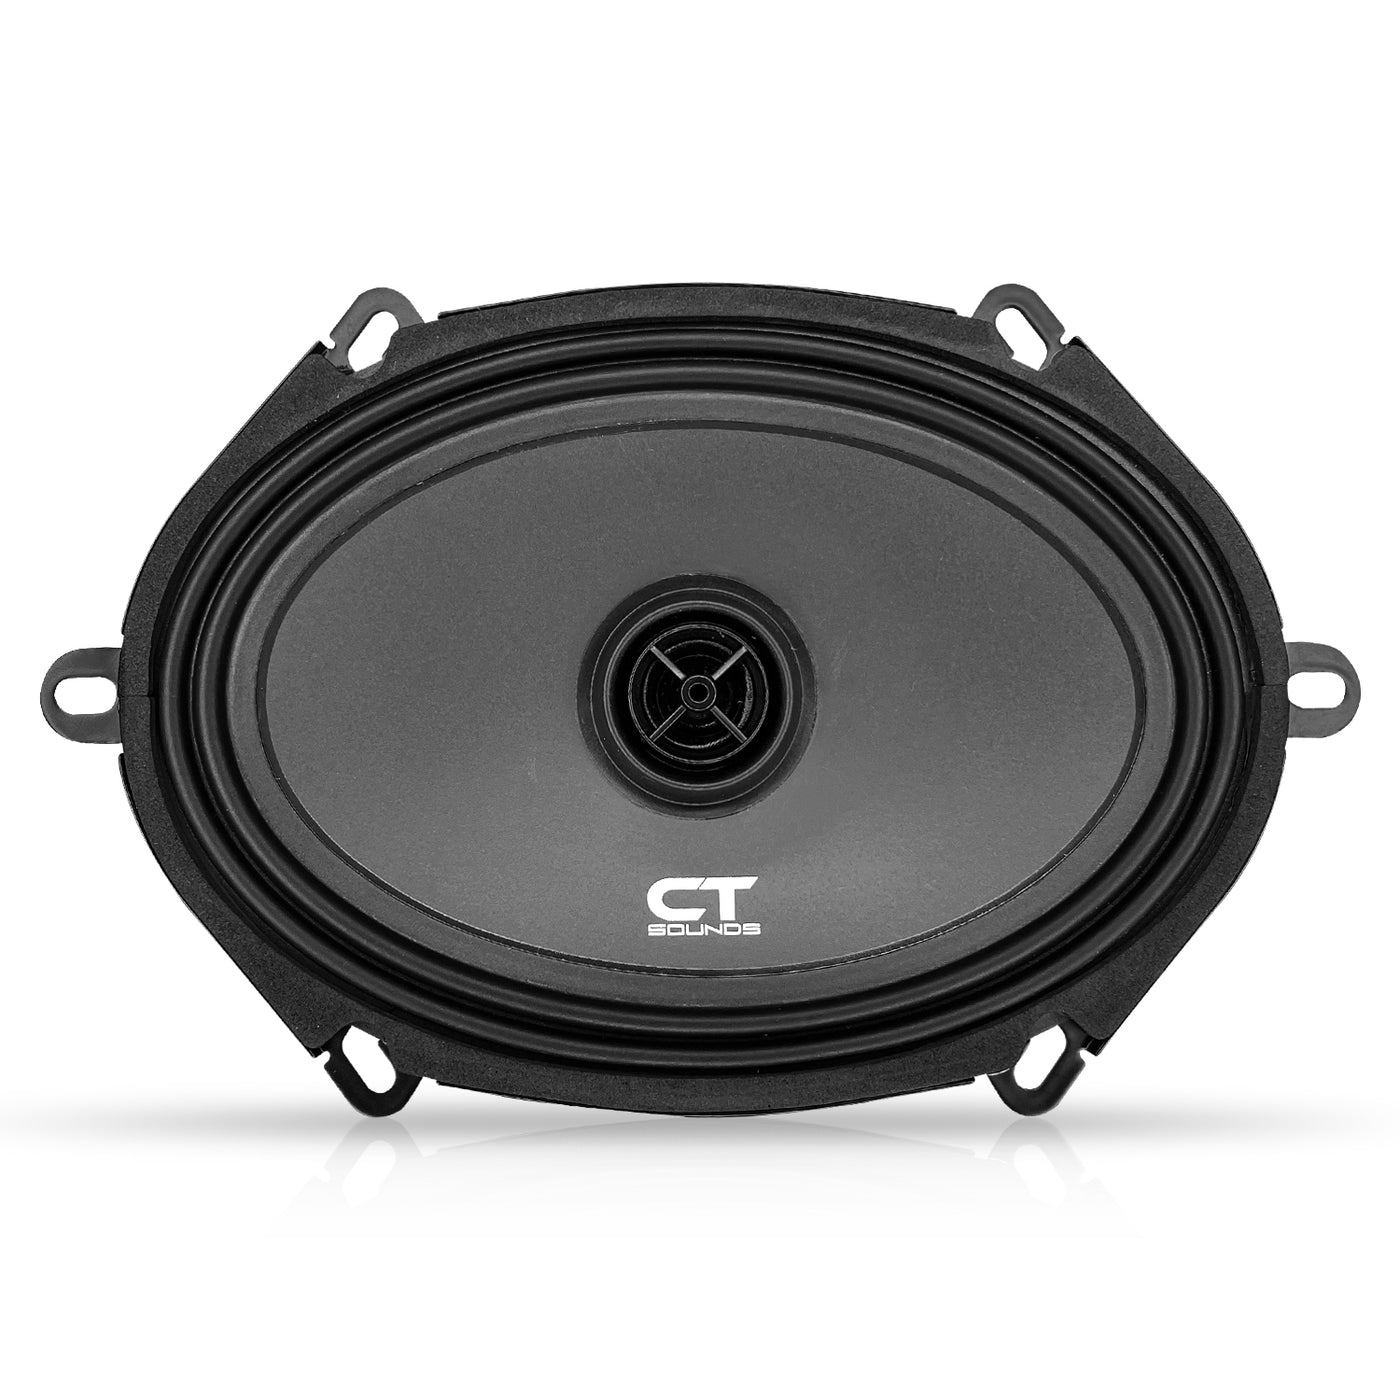 TROPO-5X7-COX // 60 Watts RMS 5x7” Shallow-Mount Car Speakers, Pair